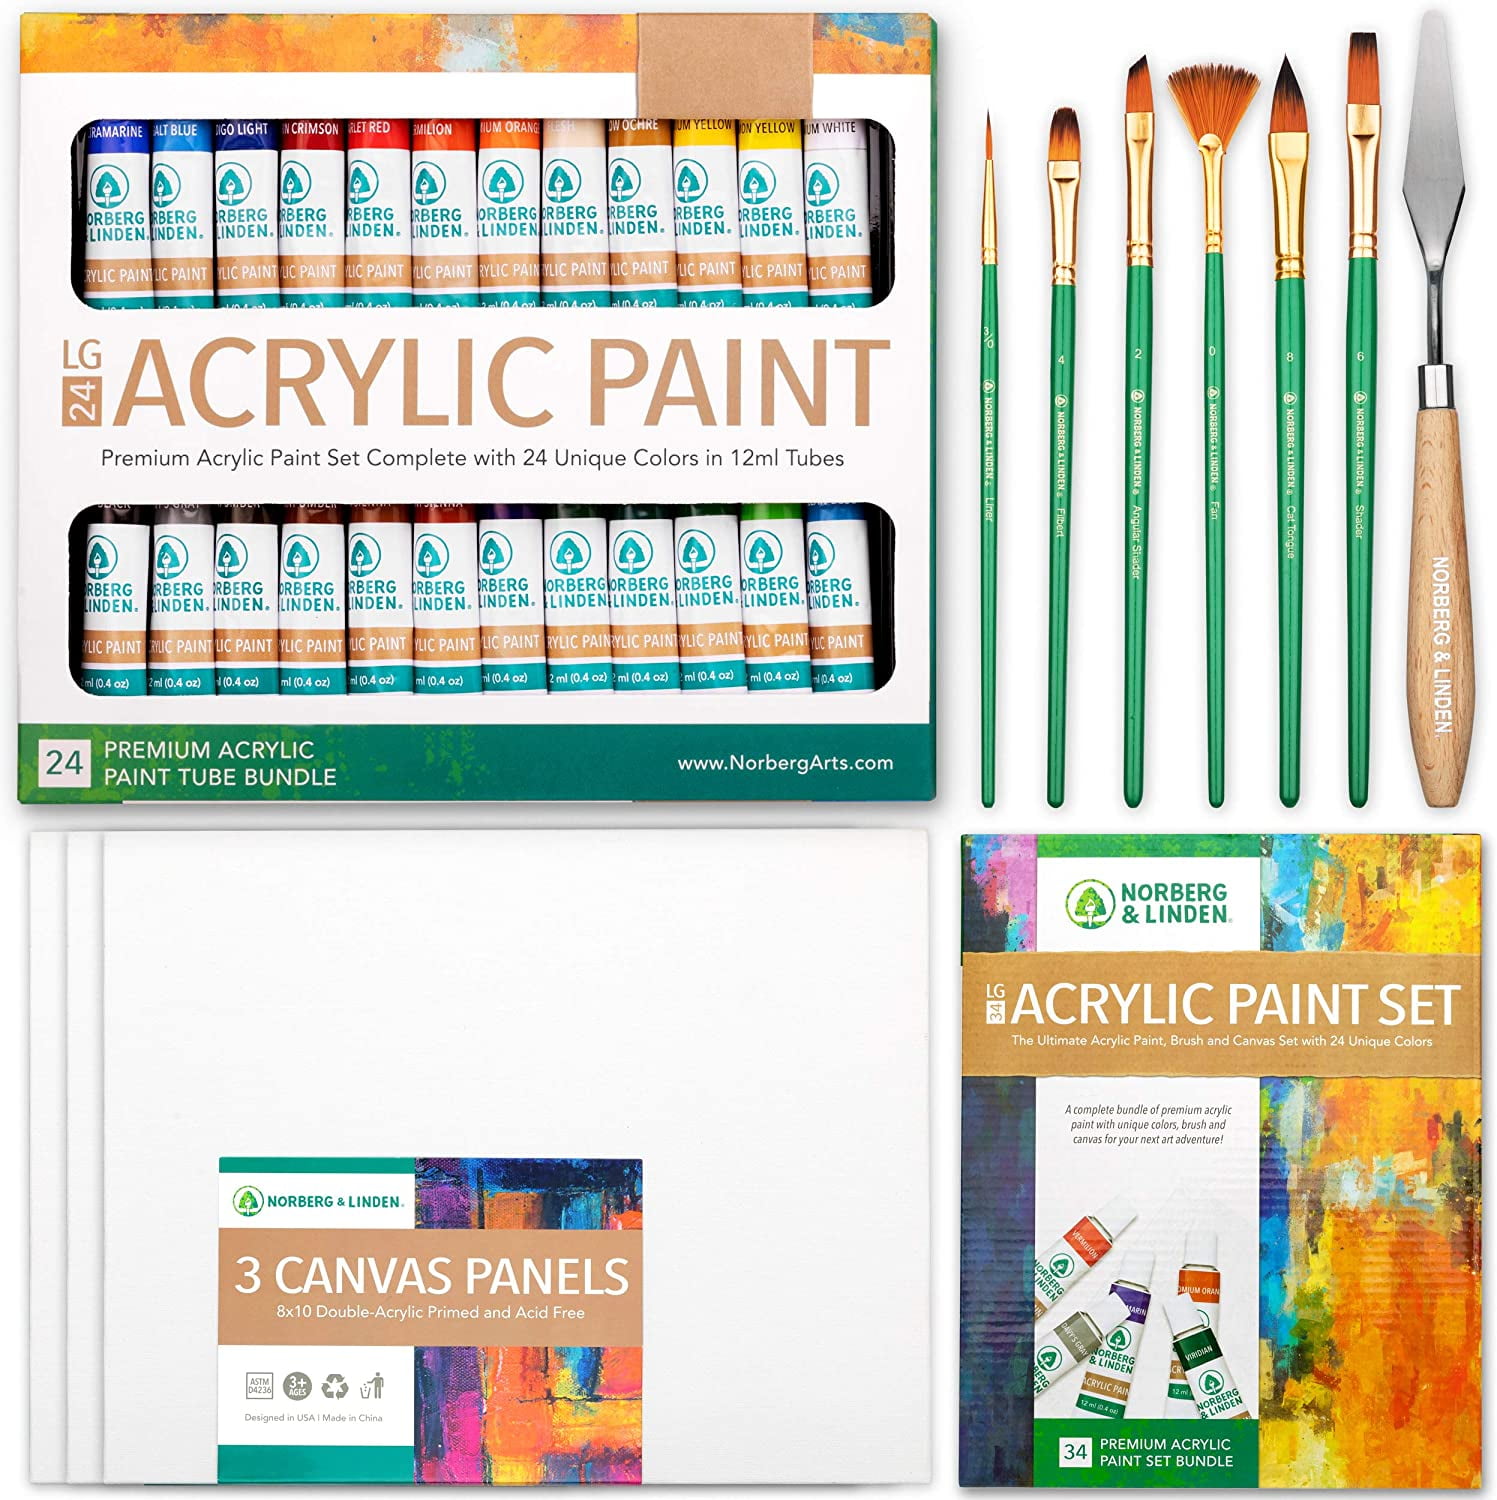 Lukas CRYL Studio Artist Acrylic Paint - Fast Drying Medium-Viscosity  Acrylic Paint for Canvas, Artists, Projects, & More! - [Set of 6 - 75 ml  Tubes] 